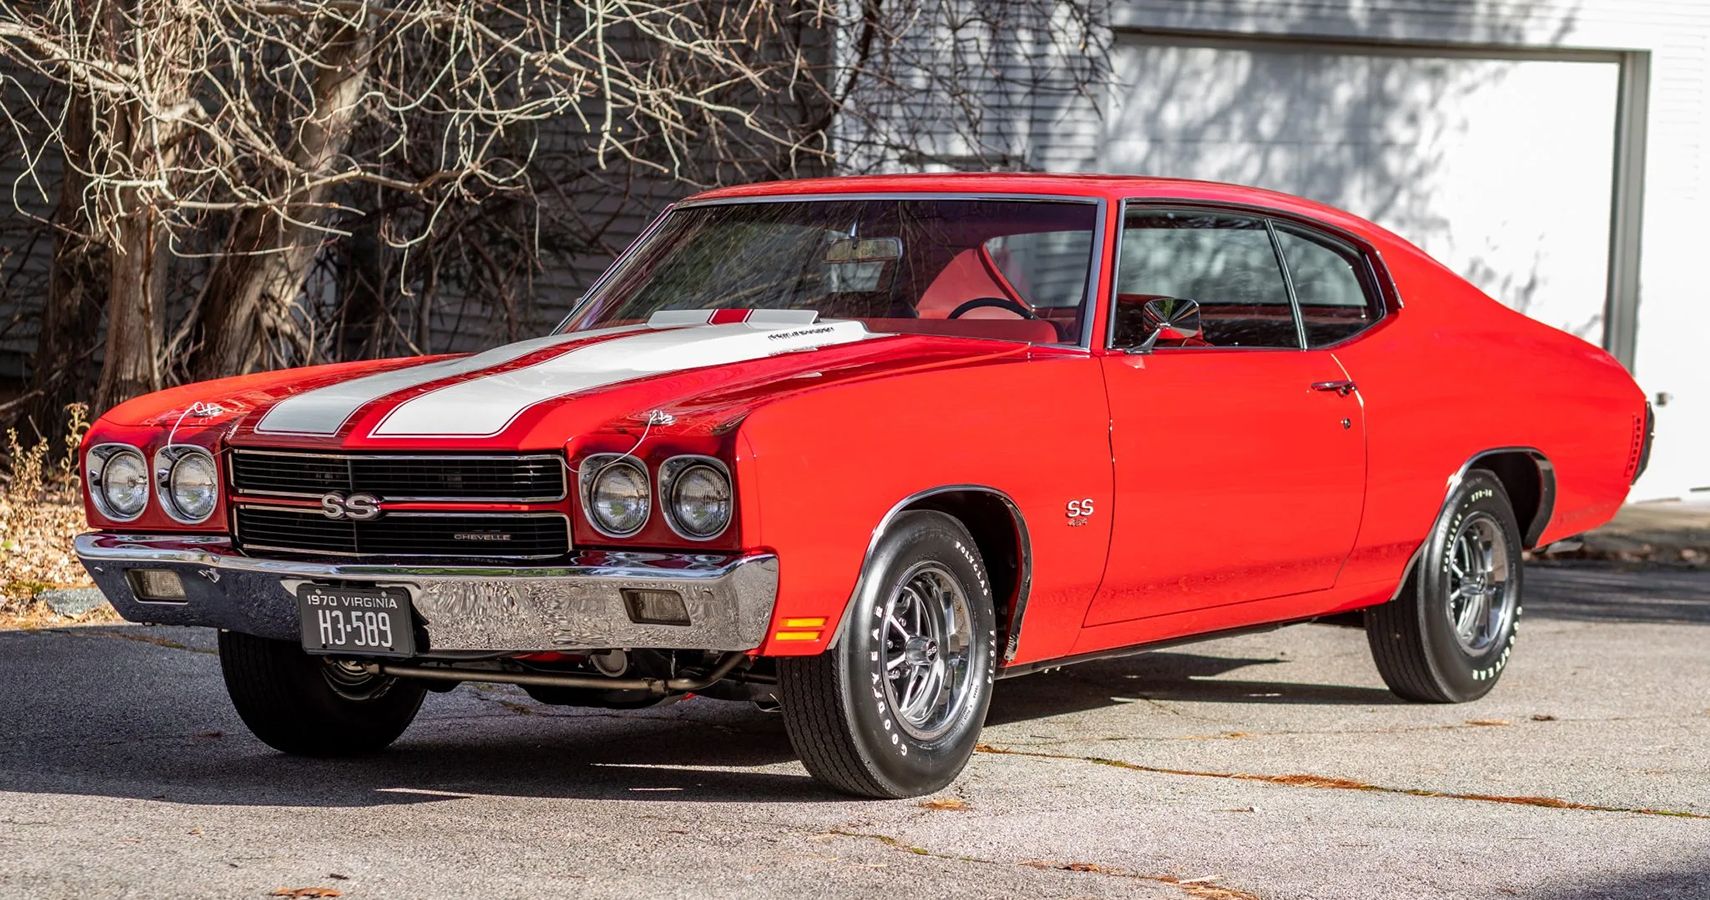 Red Chevy Chevelle muscle car parked